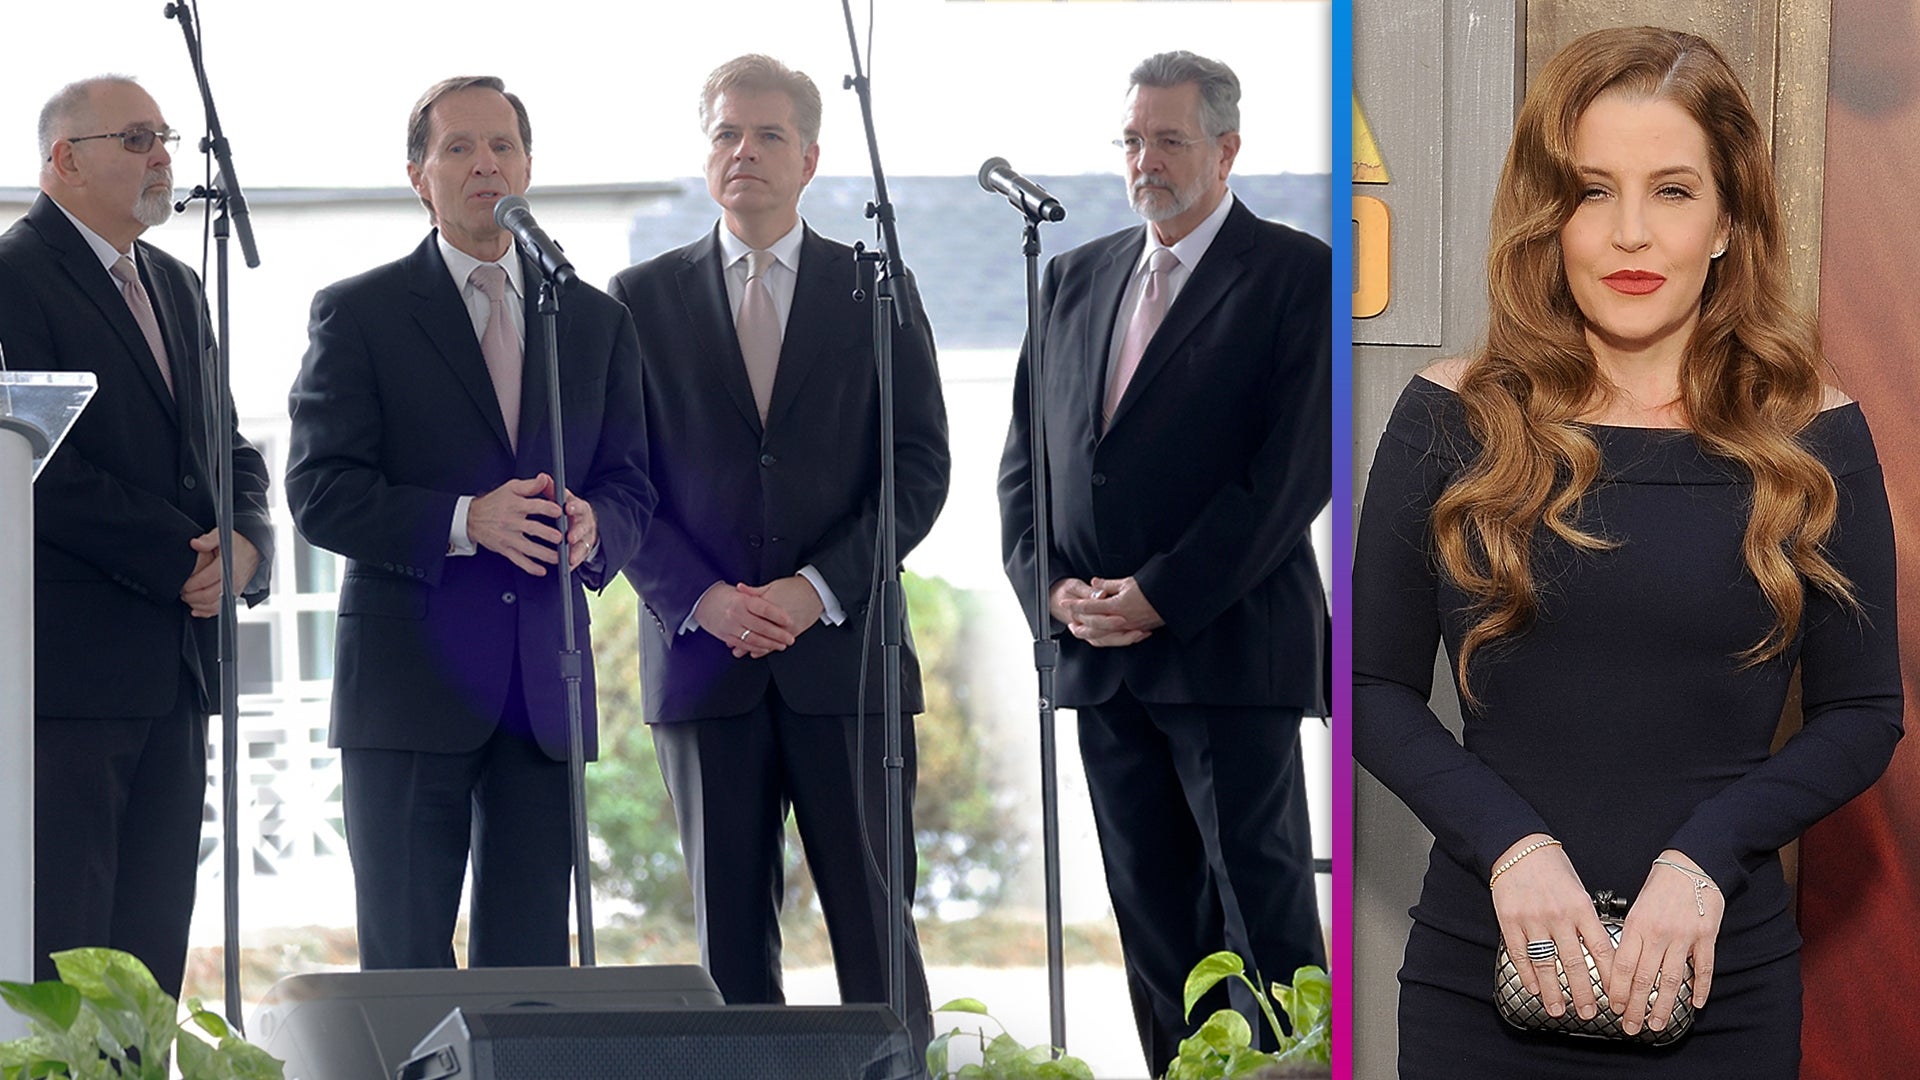 Lisa Marie Presley's Memorial: The Blackwood Brothers Pay Tribute With Speech and Performance   